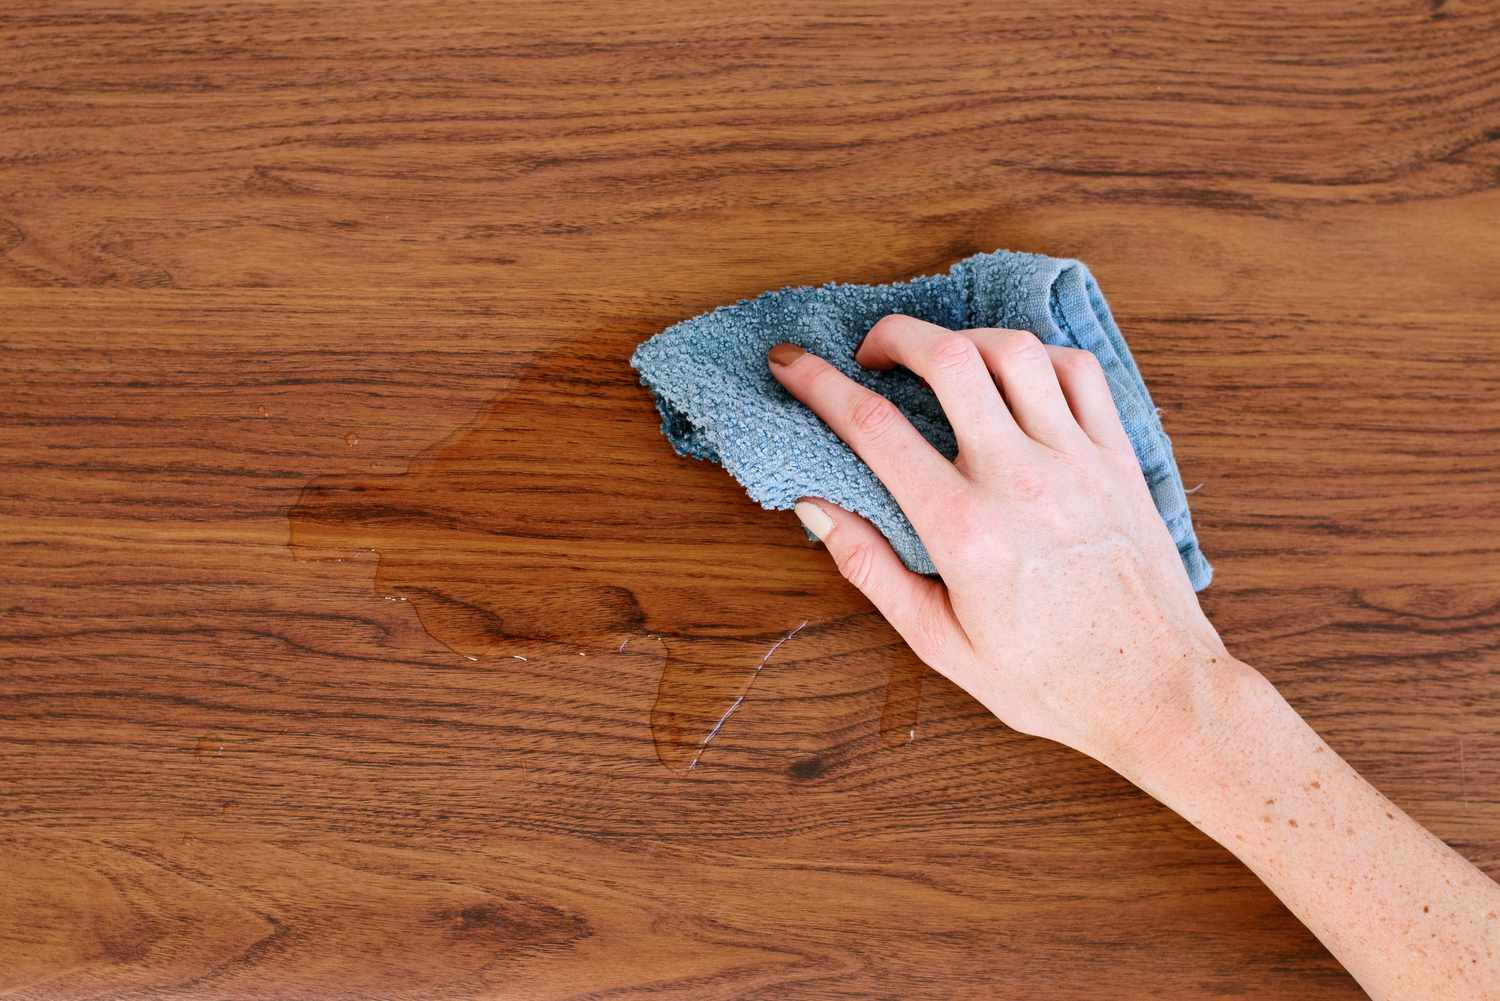 Wipe away liquid spills on the wood surface using a soft cloth